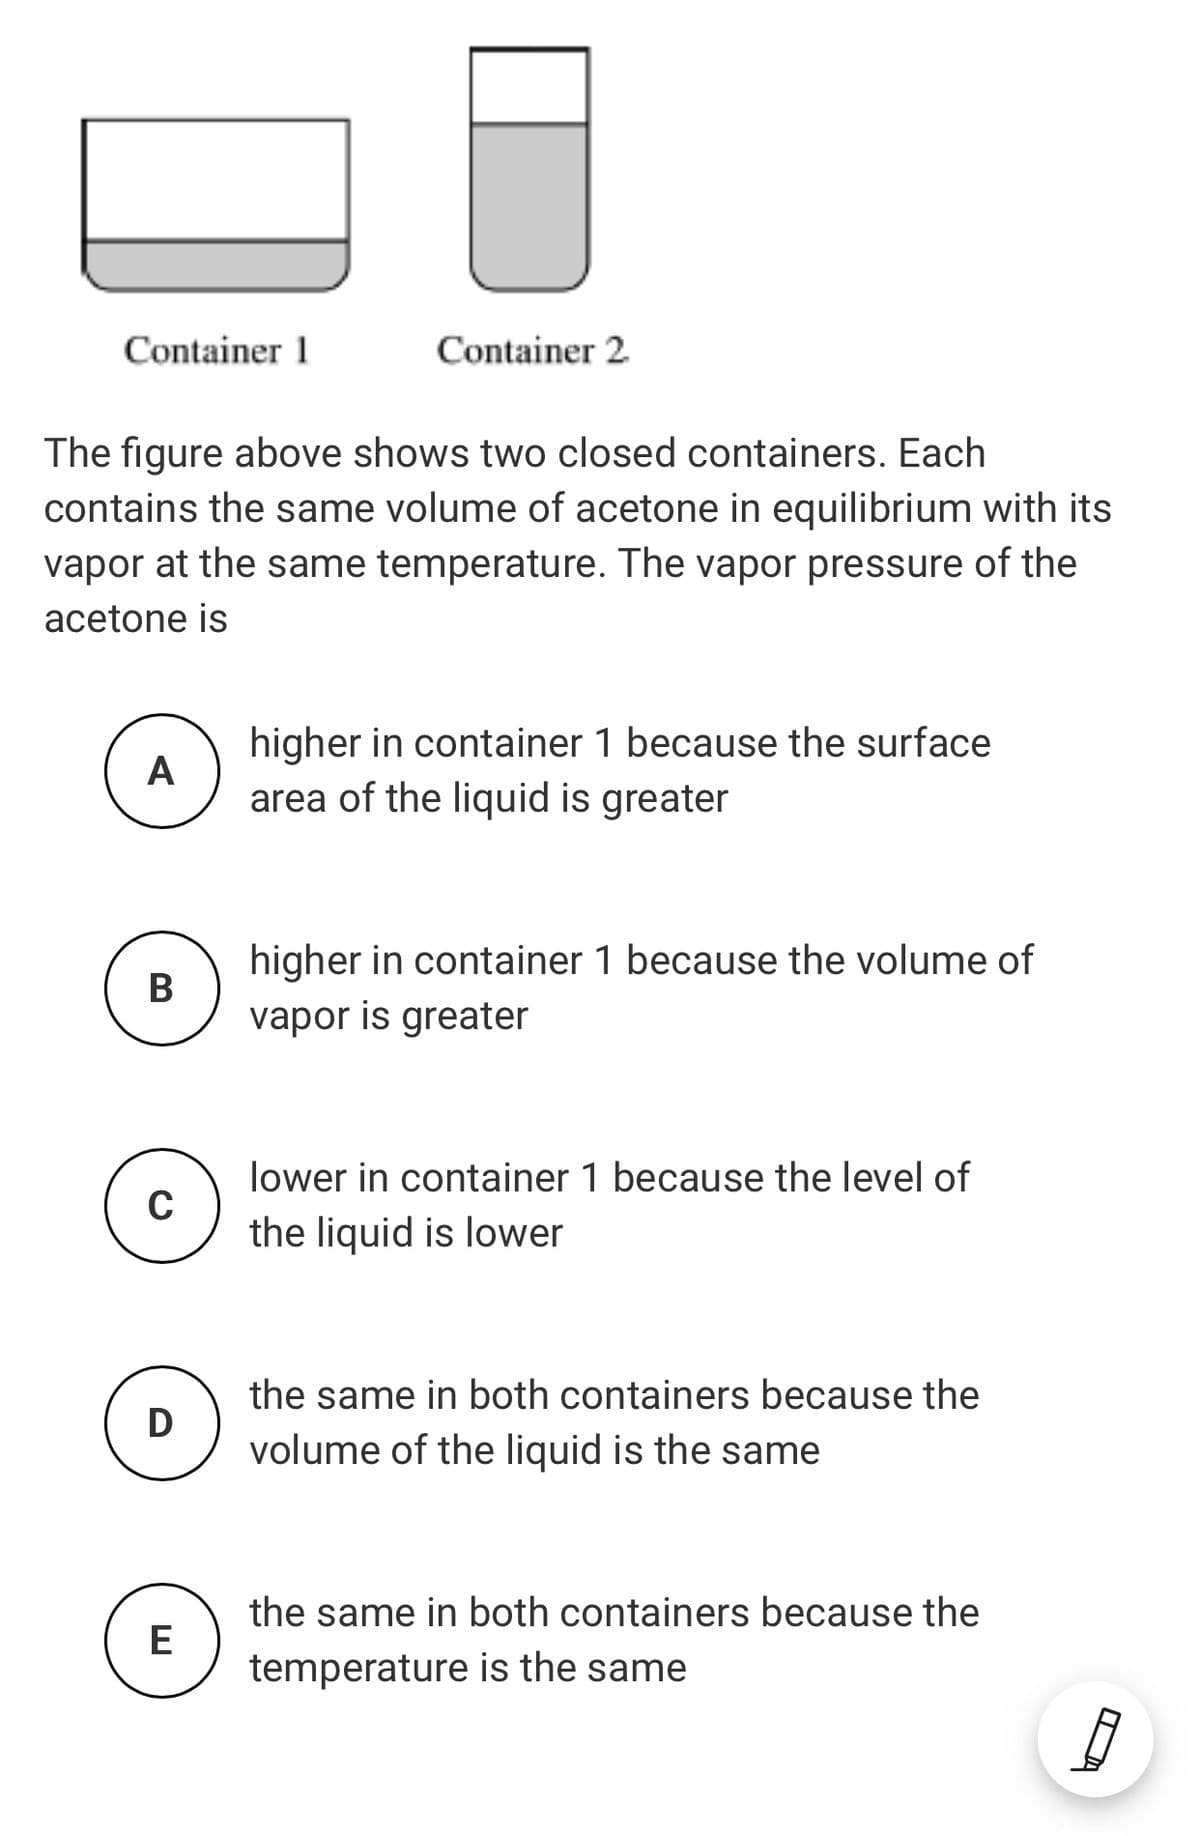 Container 1
Container 2
The figure above shows two closed containers. Each
contains the same volume of acetone in equilibrium with its
vapor at the same temperature. The vapor pressure of the
acetone is
higher in container 1 because the surface
area of the liquid is greater
A
higher in container 1 because the volume of
vapor is greater
lower in container 1 because the level of
C
the liquid is lower
the same in both containers because the
D
volume of the liquid is the same
the same in both containers because the
E
temperature is the same
